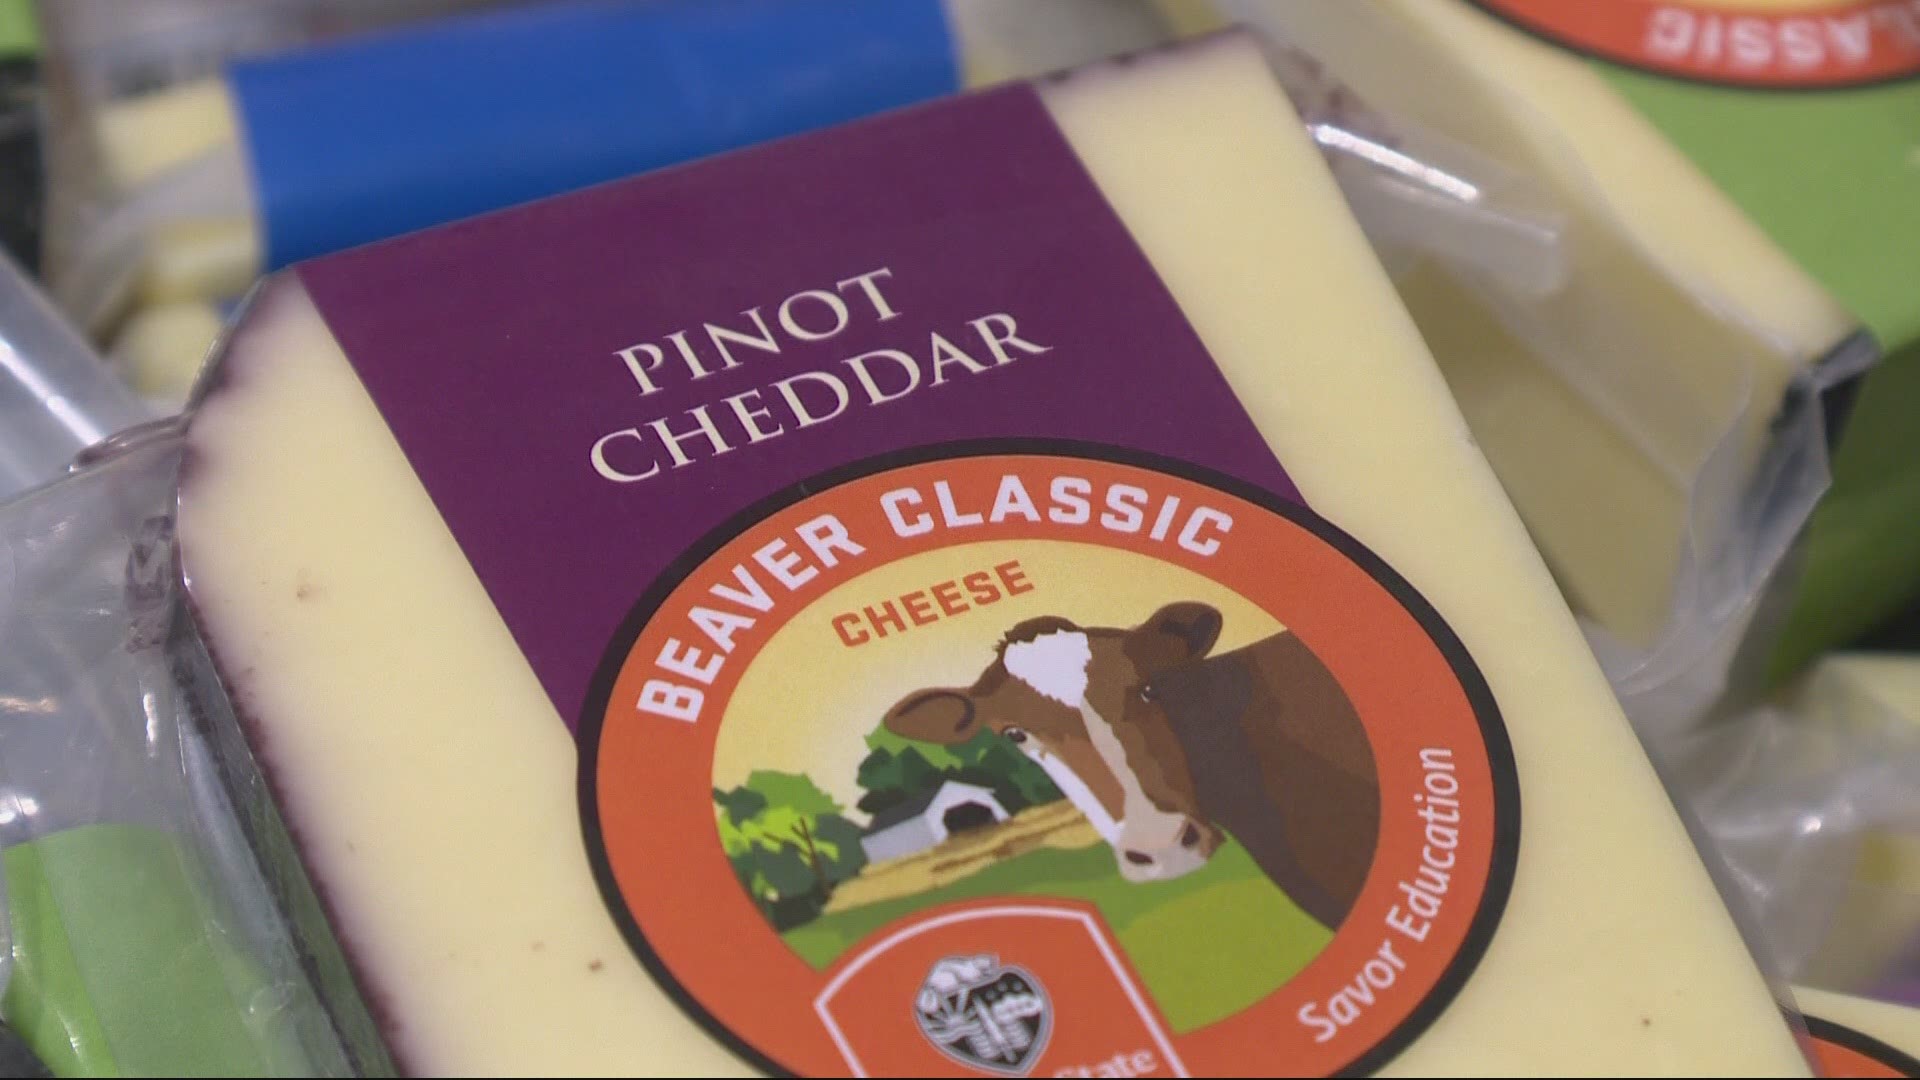 The student-run Arbuthnot Dairy Center at Oregon State University has been selling items under its “Beaver Classic” brand through businesses and farmers' markets.